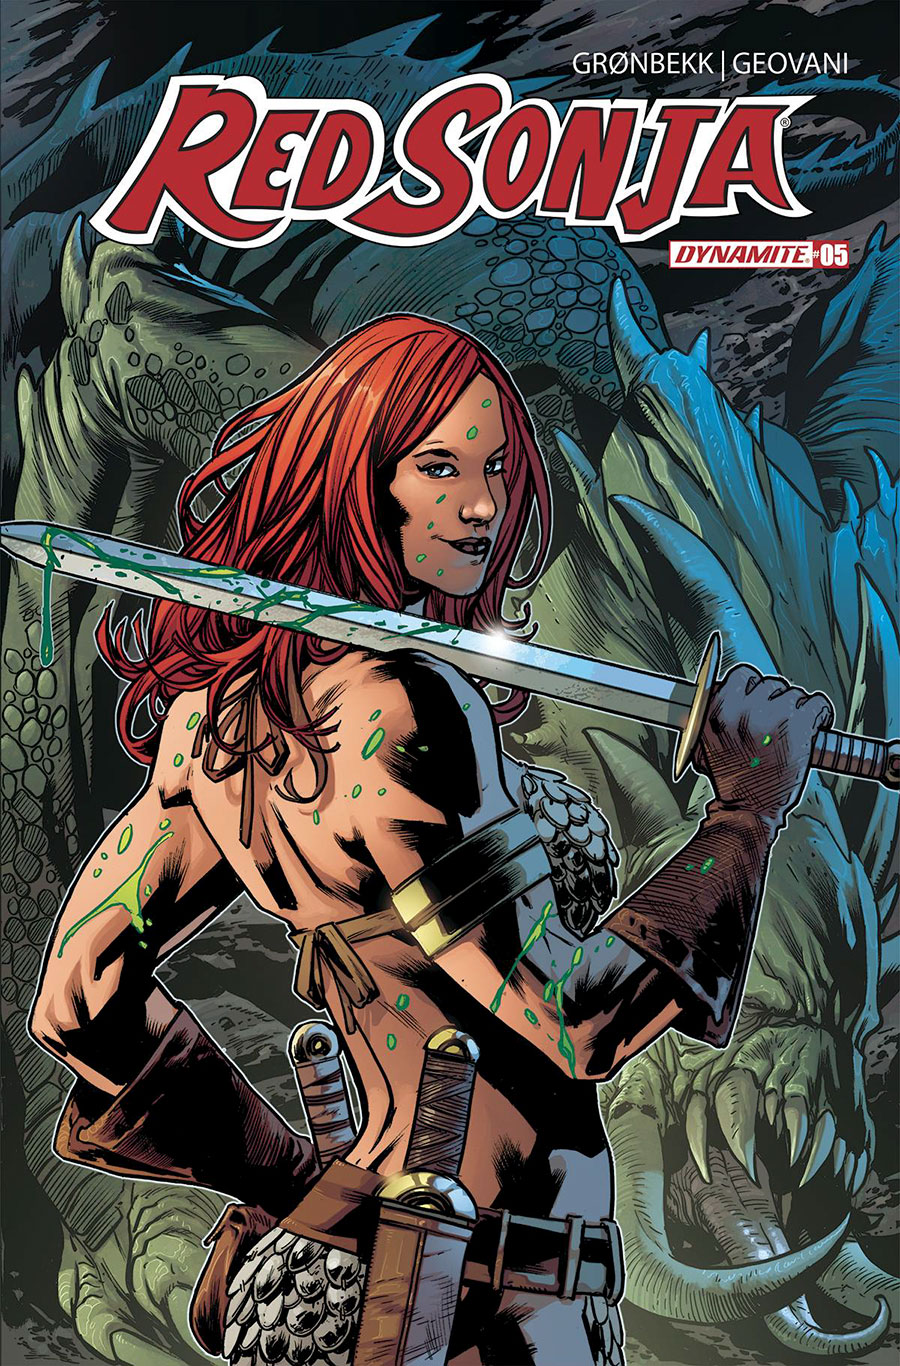 Red Sonja Vol 10 #5 Cover D Variant Bryan Hitch Cover